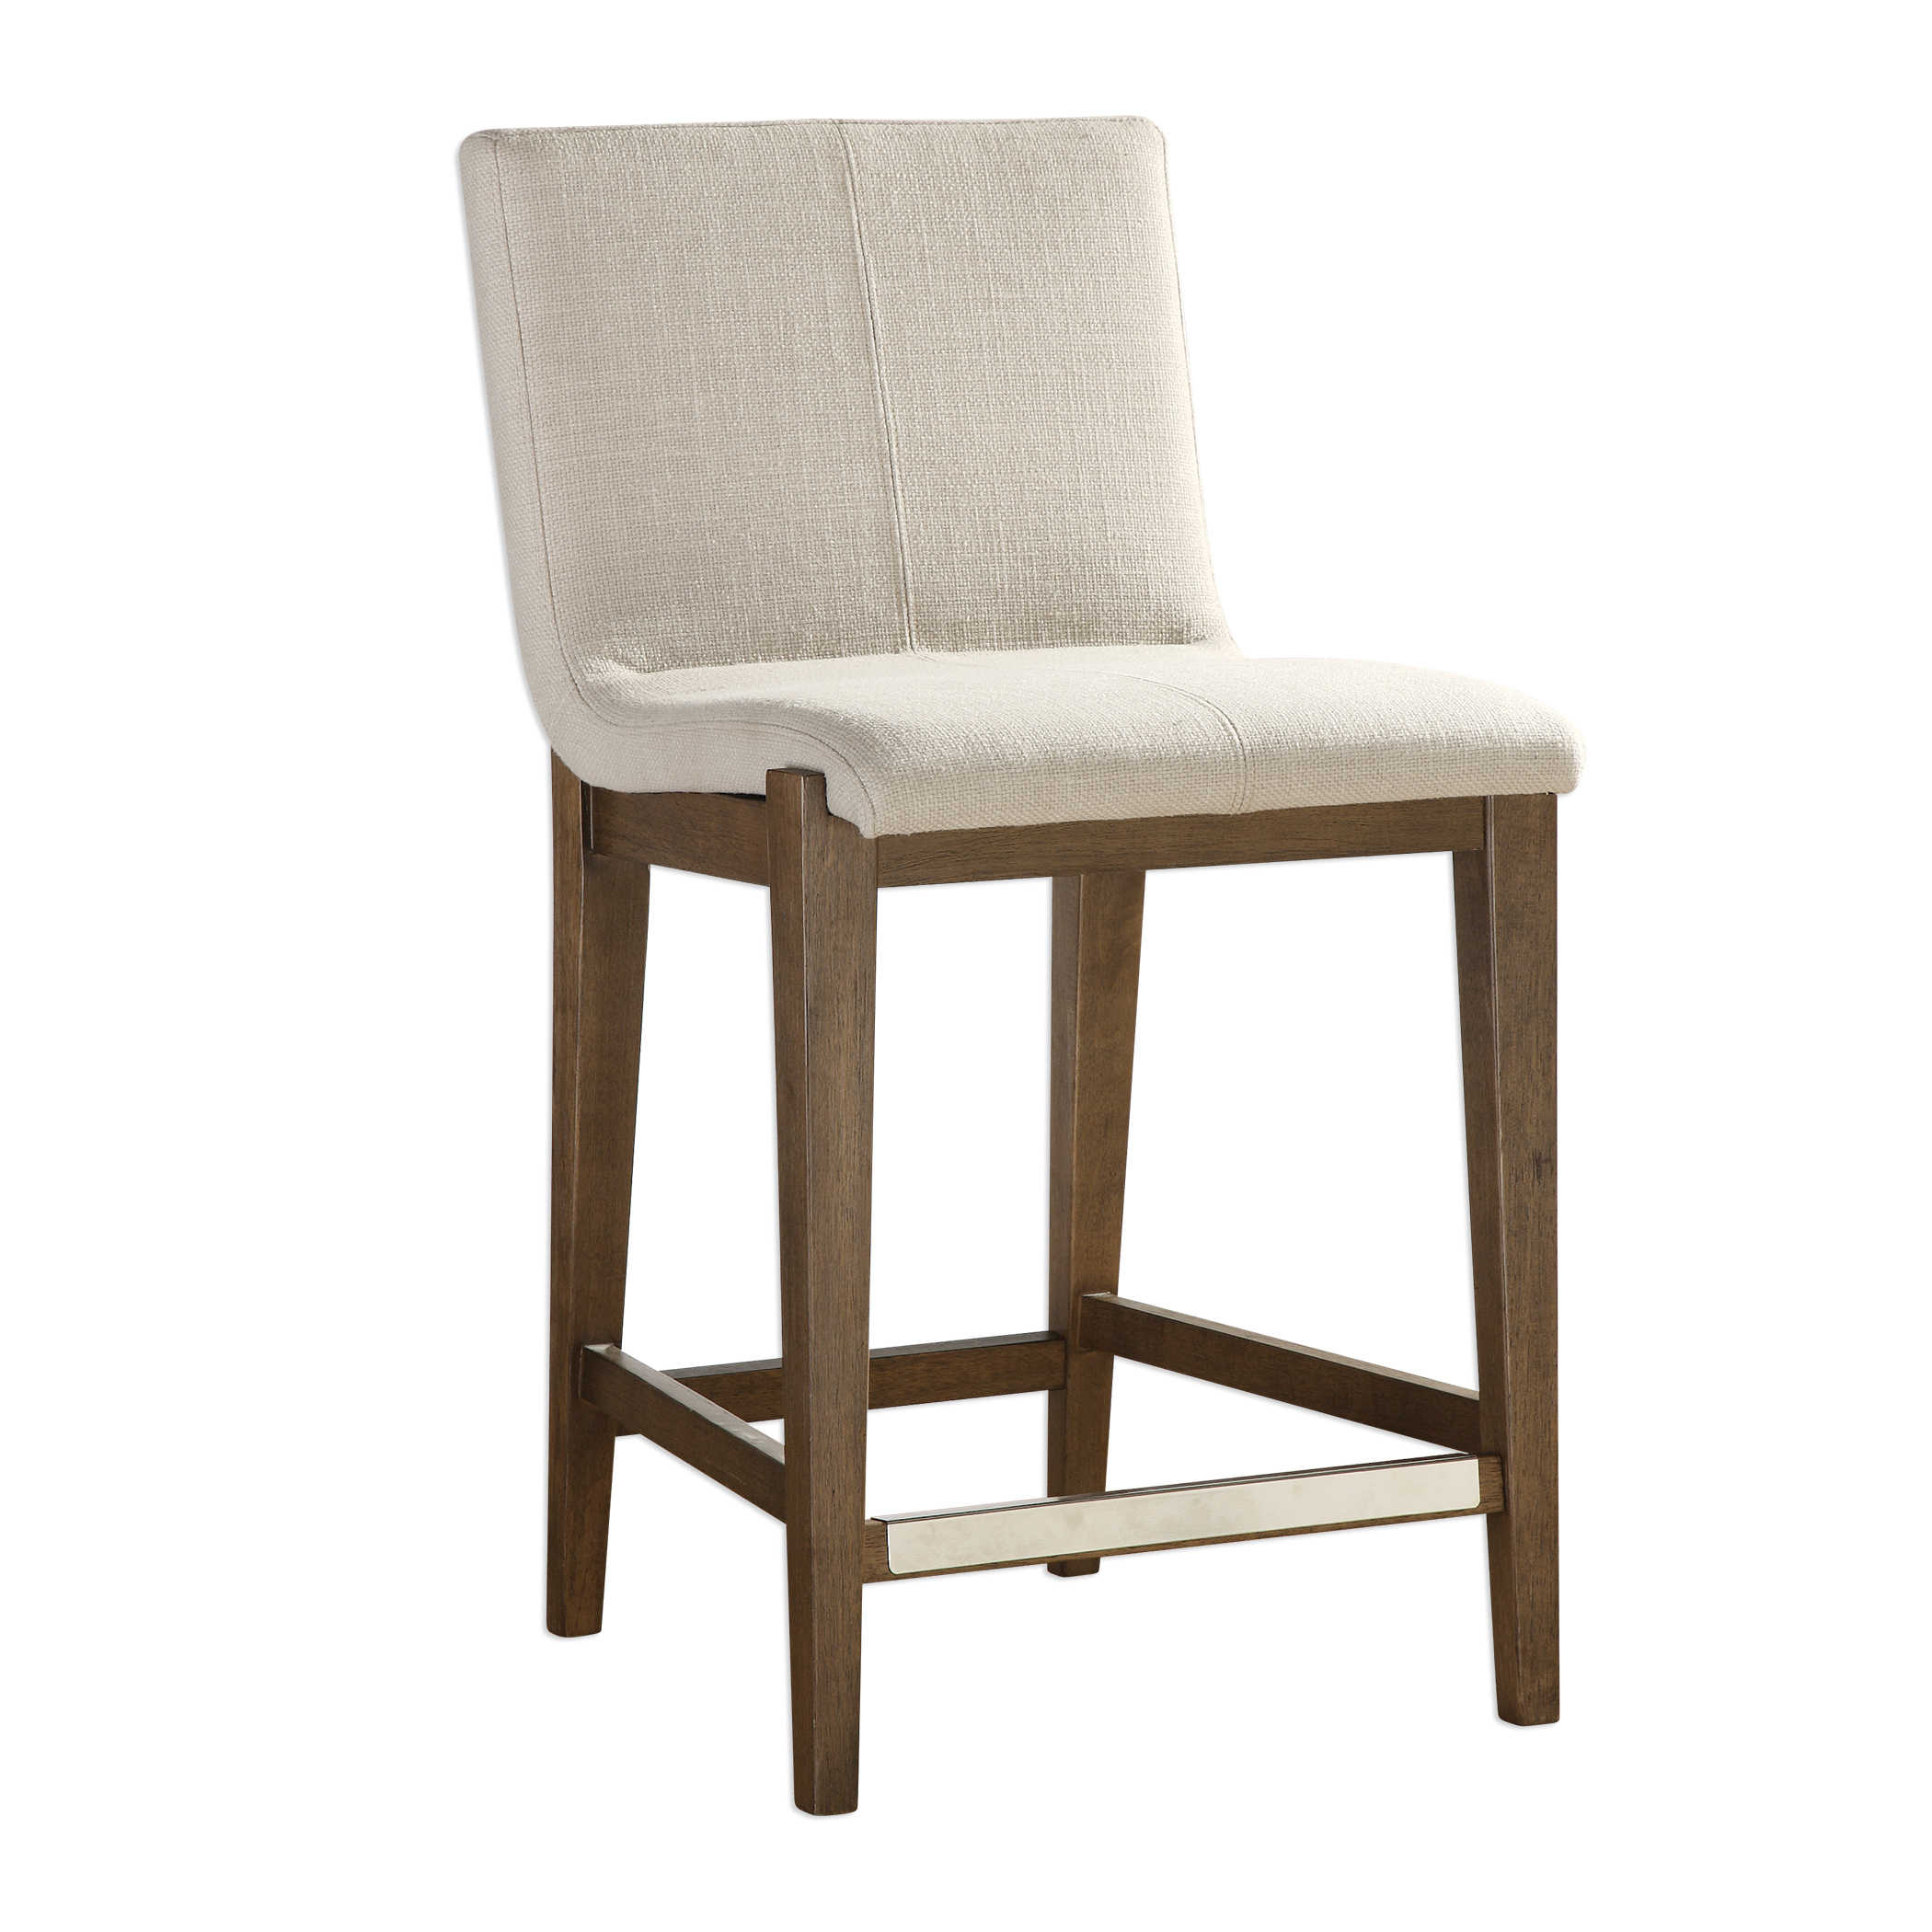 Uttermost Klemens Linen Counter Stool Décor/Home Accent Uttermost SOLID WOOD,PLYWOOD,FABRIC,FOAM  